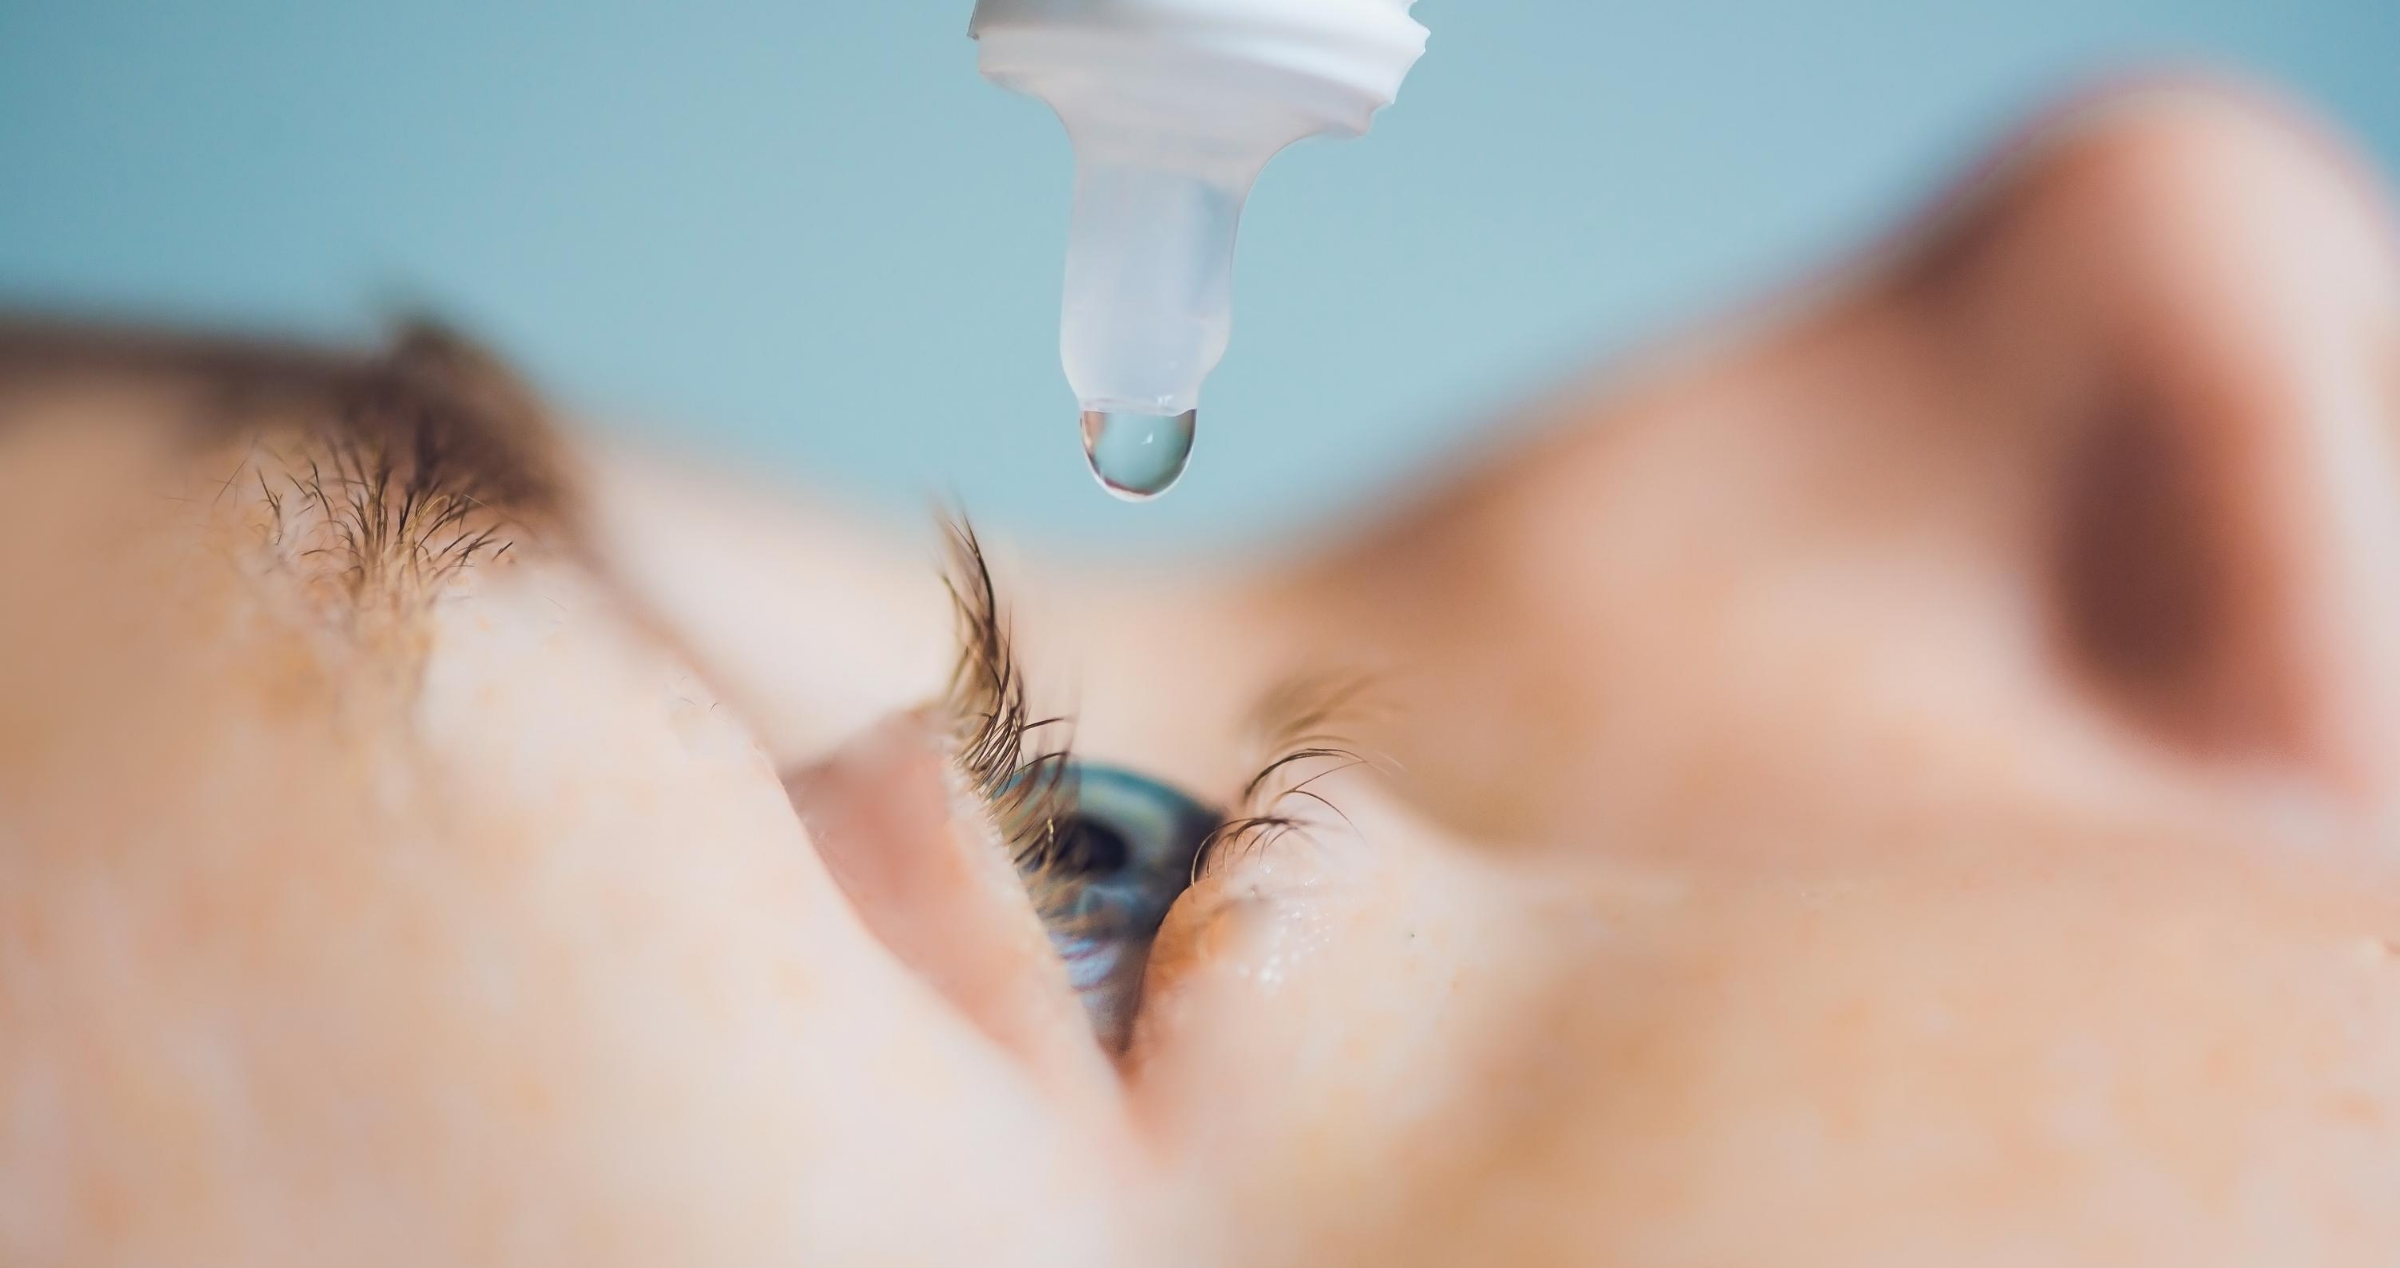 Eye Drop being administered to eye